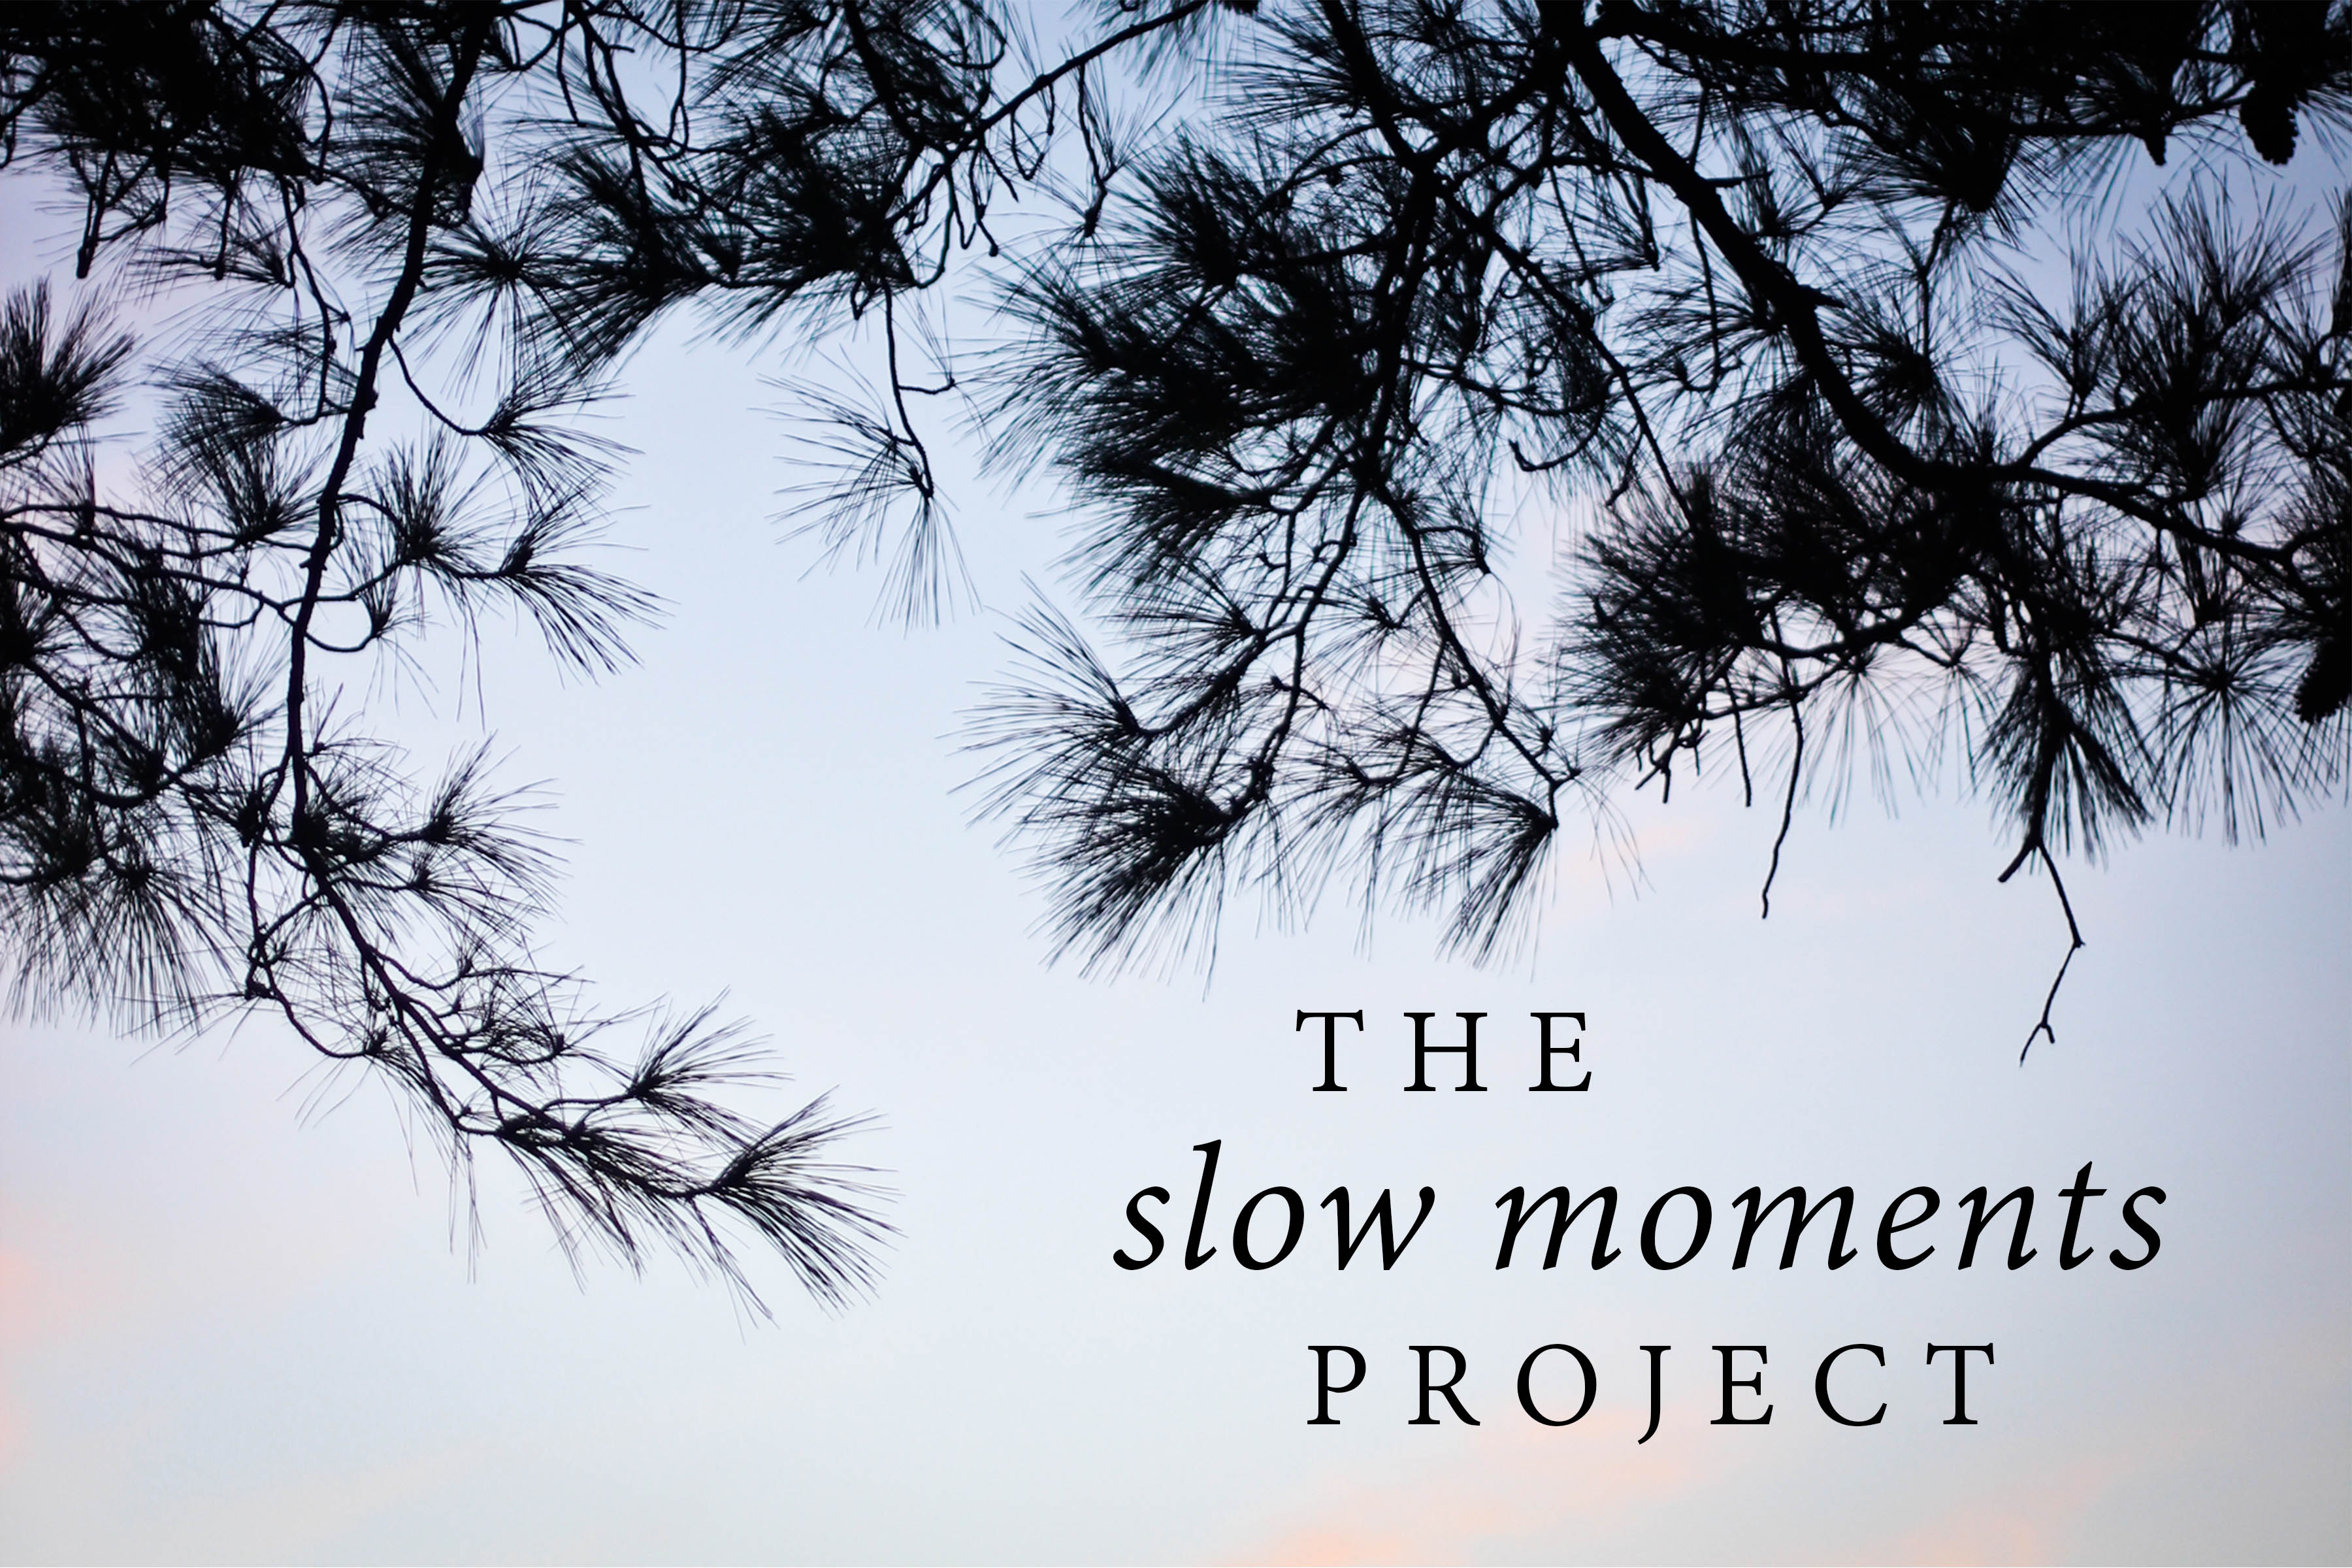 “Find your eternity in each moment”: In search of Slow Moments.